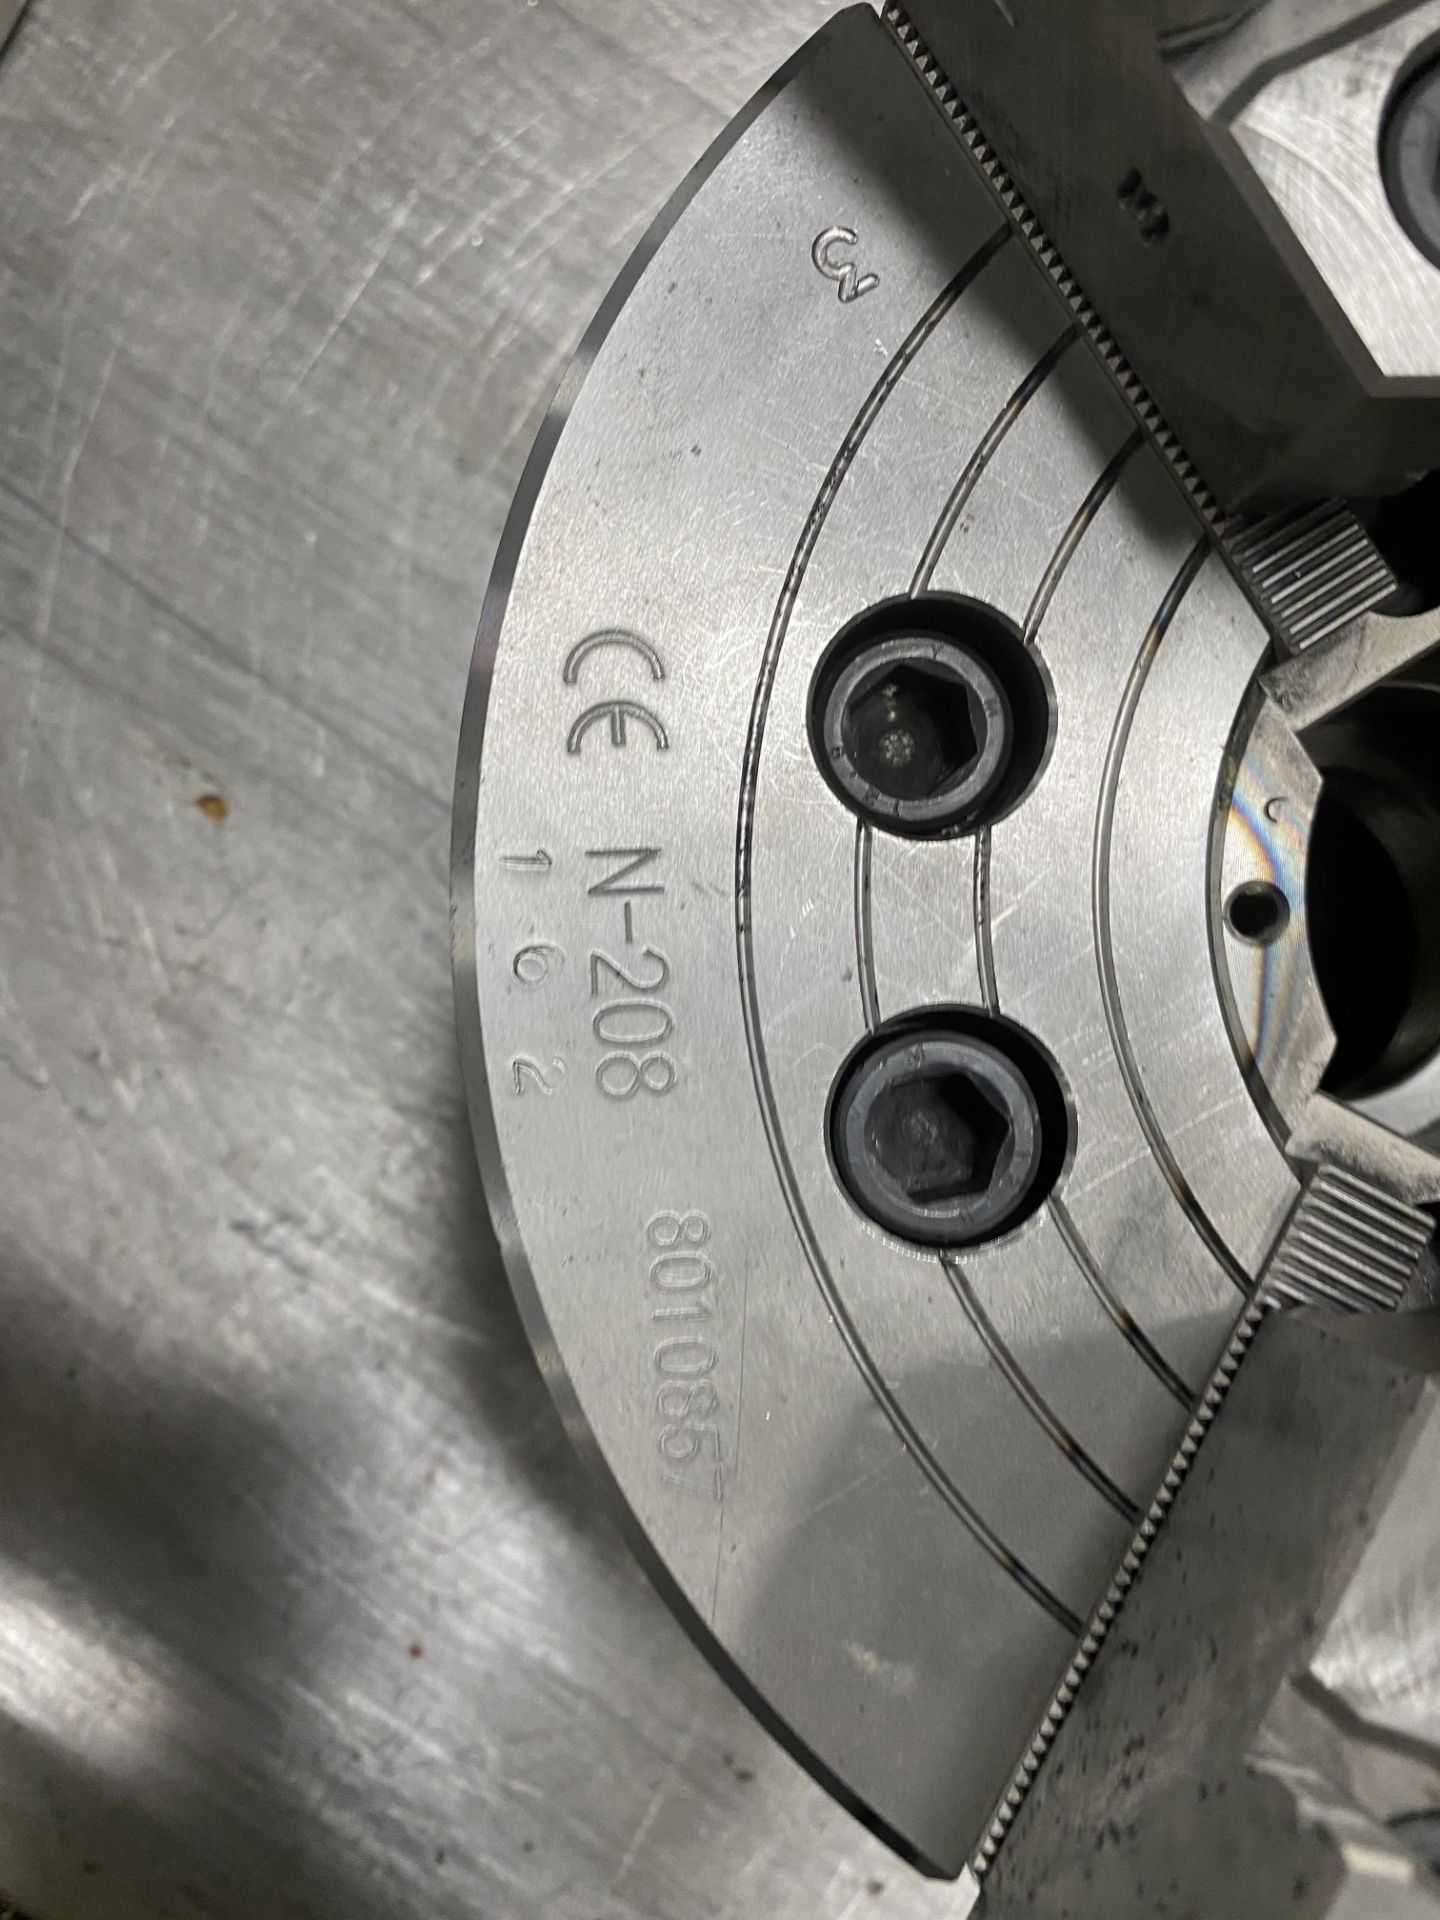 8" Auto Strong 3-Jaw Chuck - Image 4 of 5